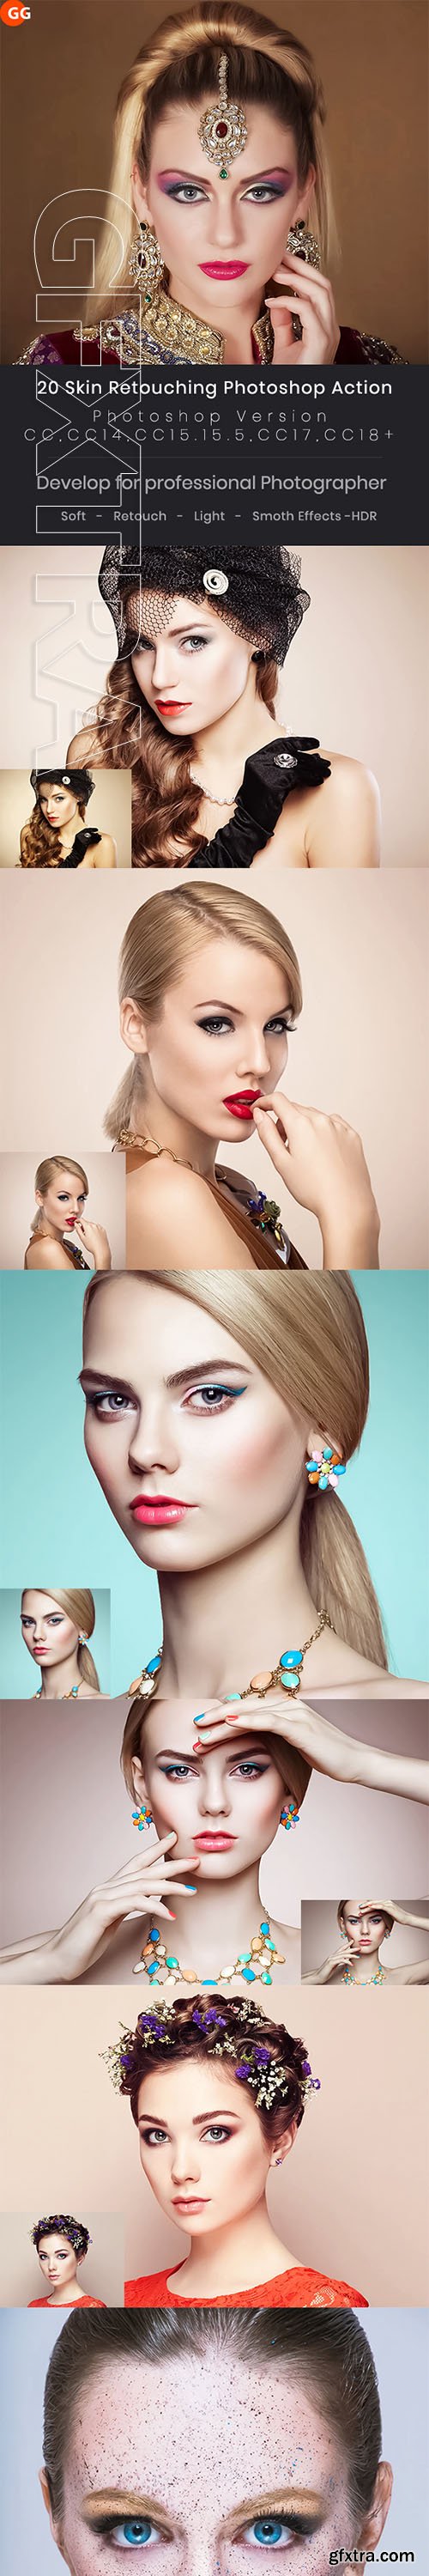 GraphicRiver - 20 Skin Retouching Photoshop Action 22937979